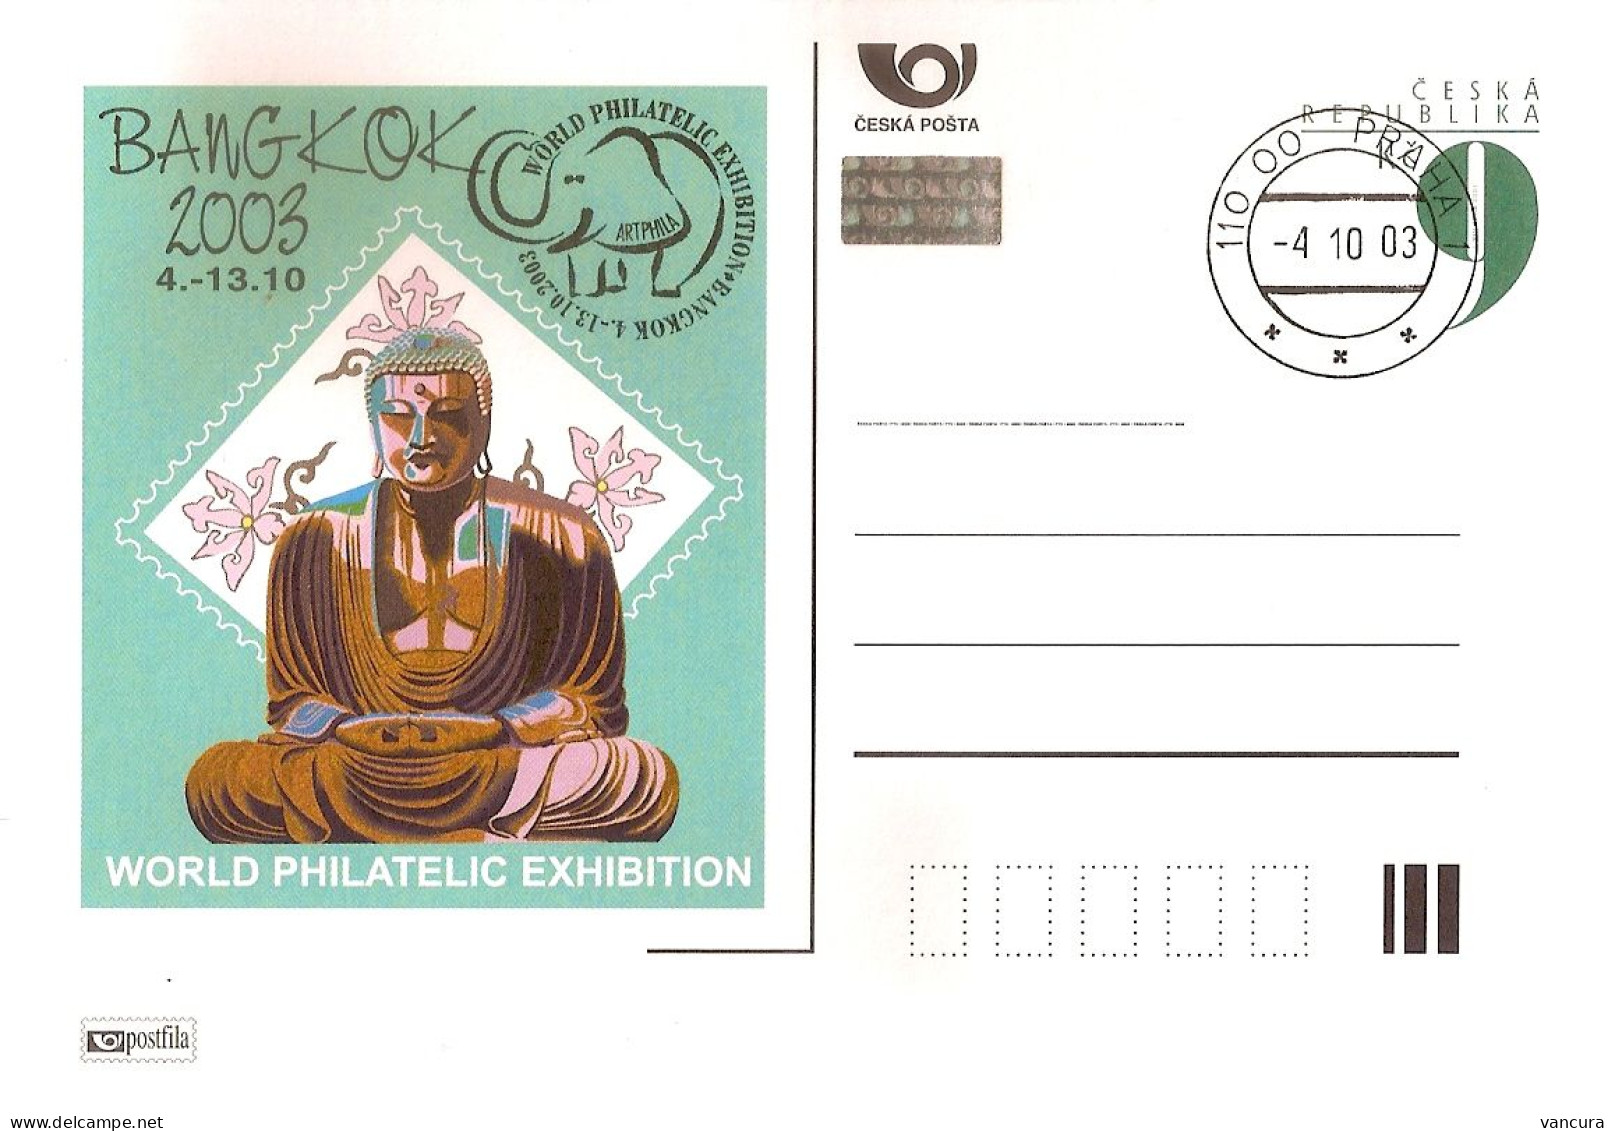 CDV A 92 Czech Republic Bangkog Stamp Exhibition Buddha 2003 The Scan Is Poor, But The Card Is OK! - Postcards